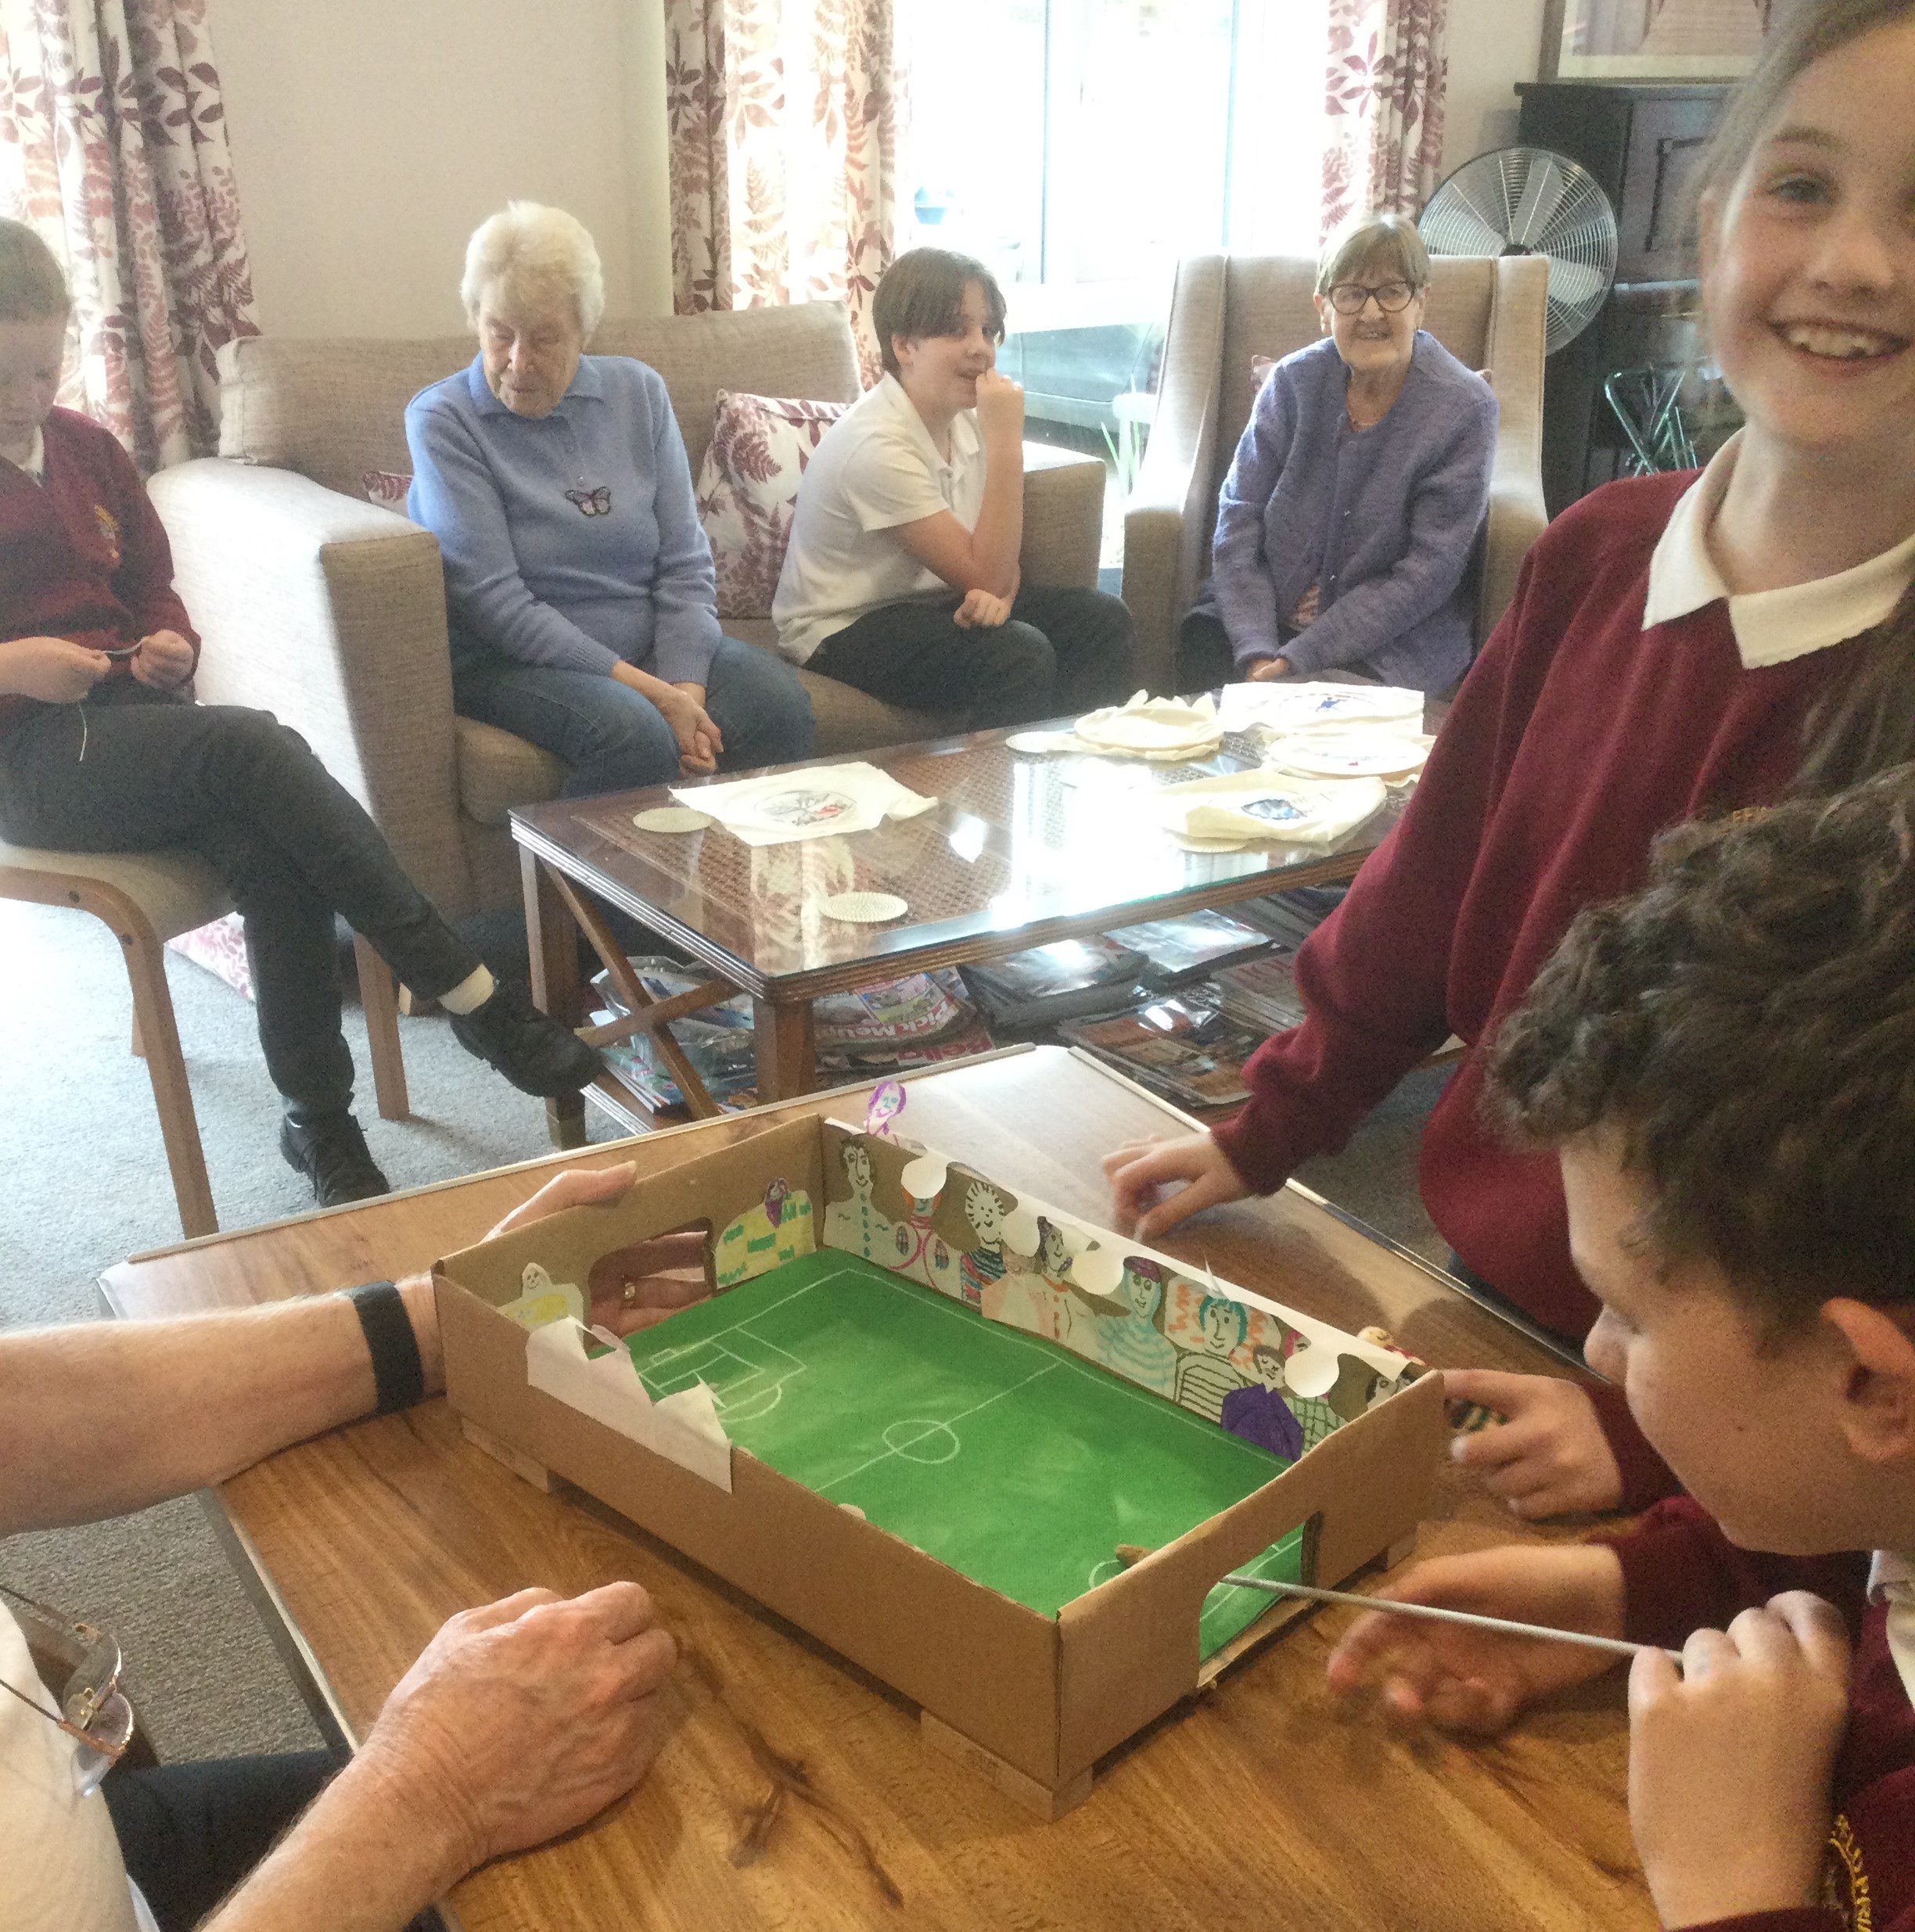 In the background a group of mixed adults and children chatting and in foreground a table top football game with children playing